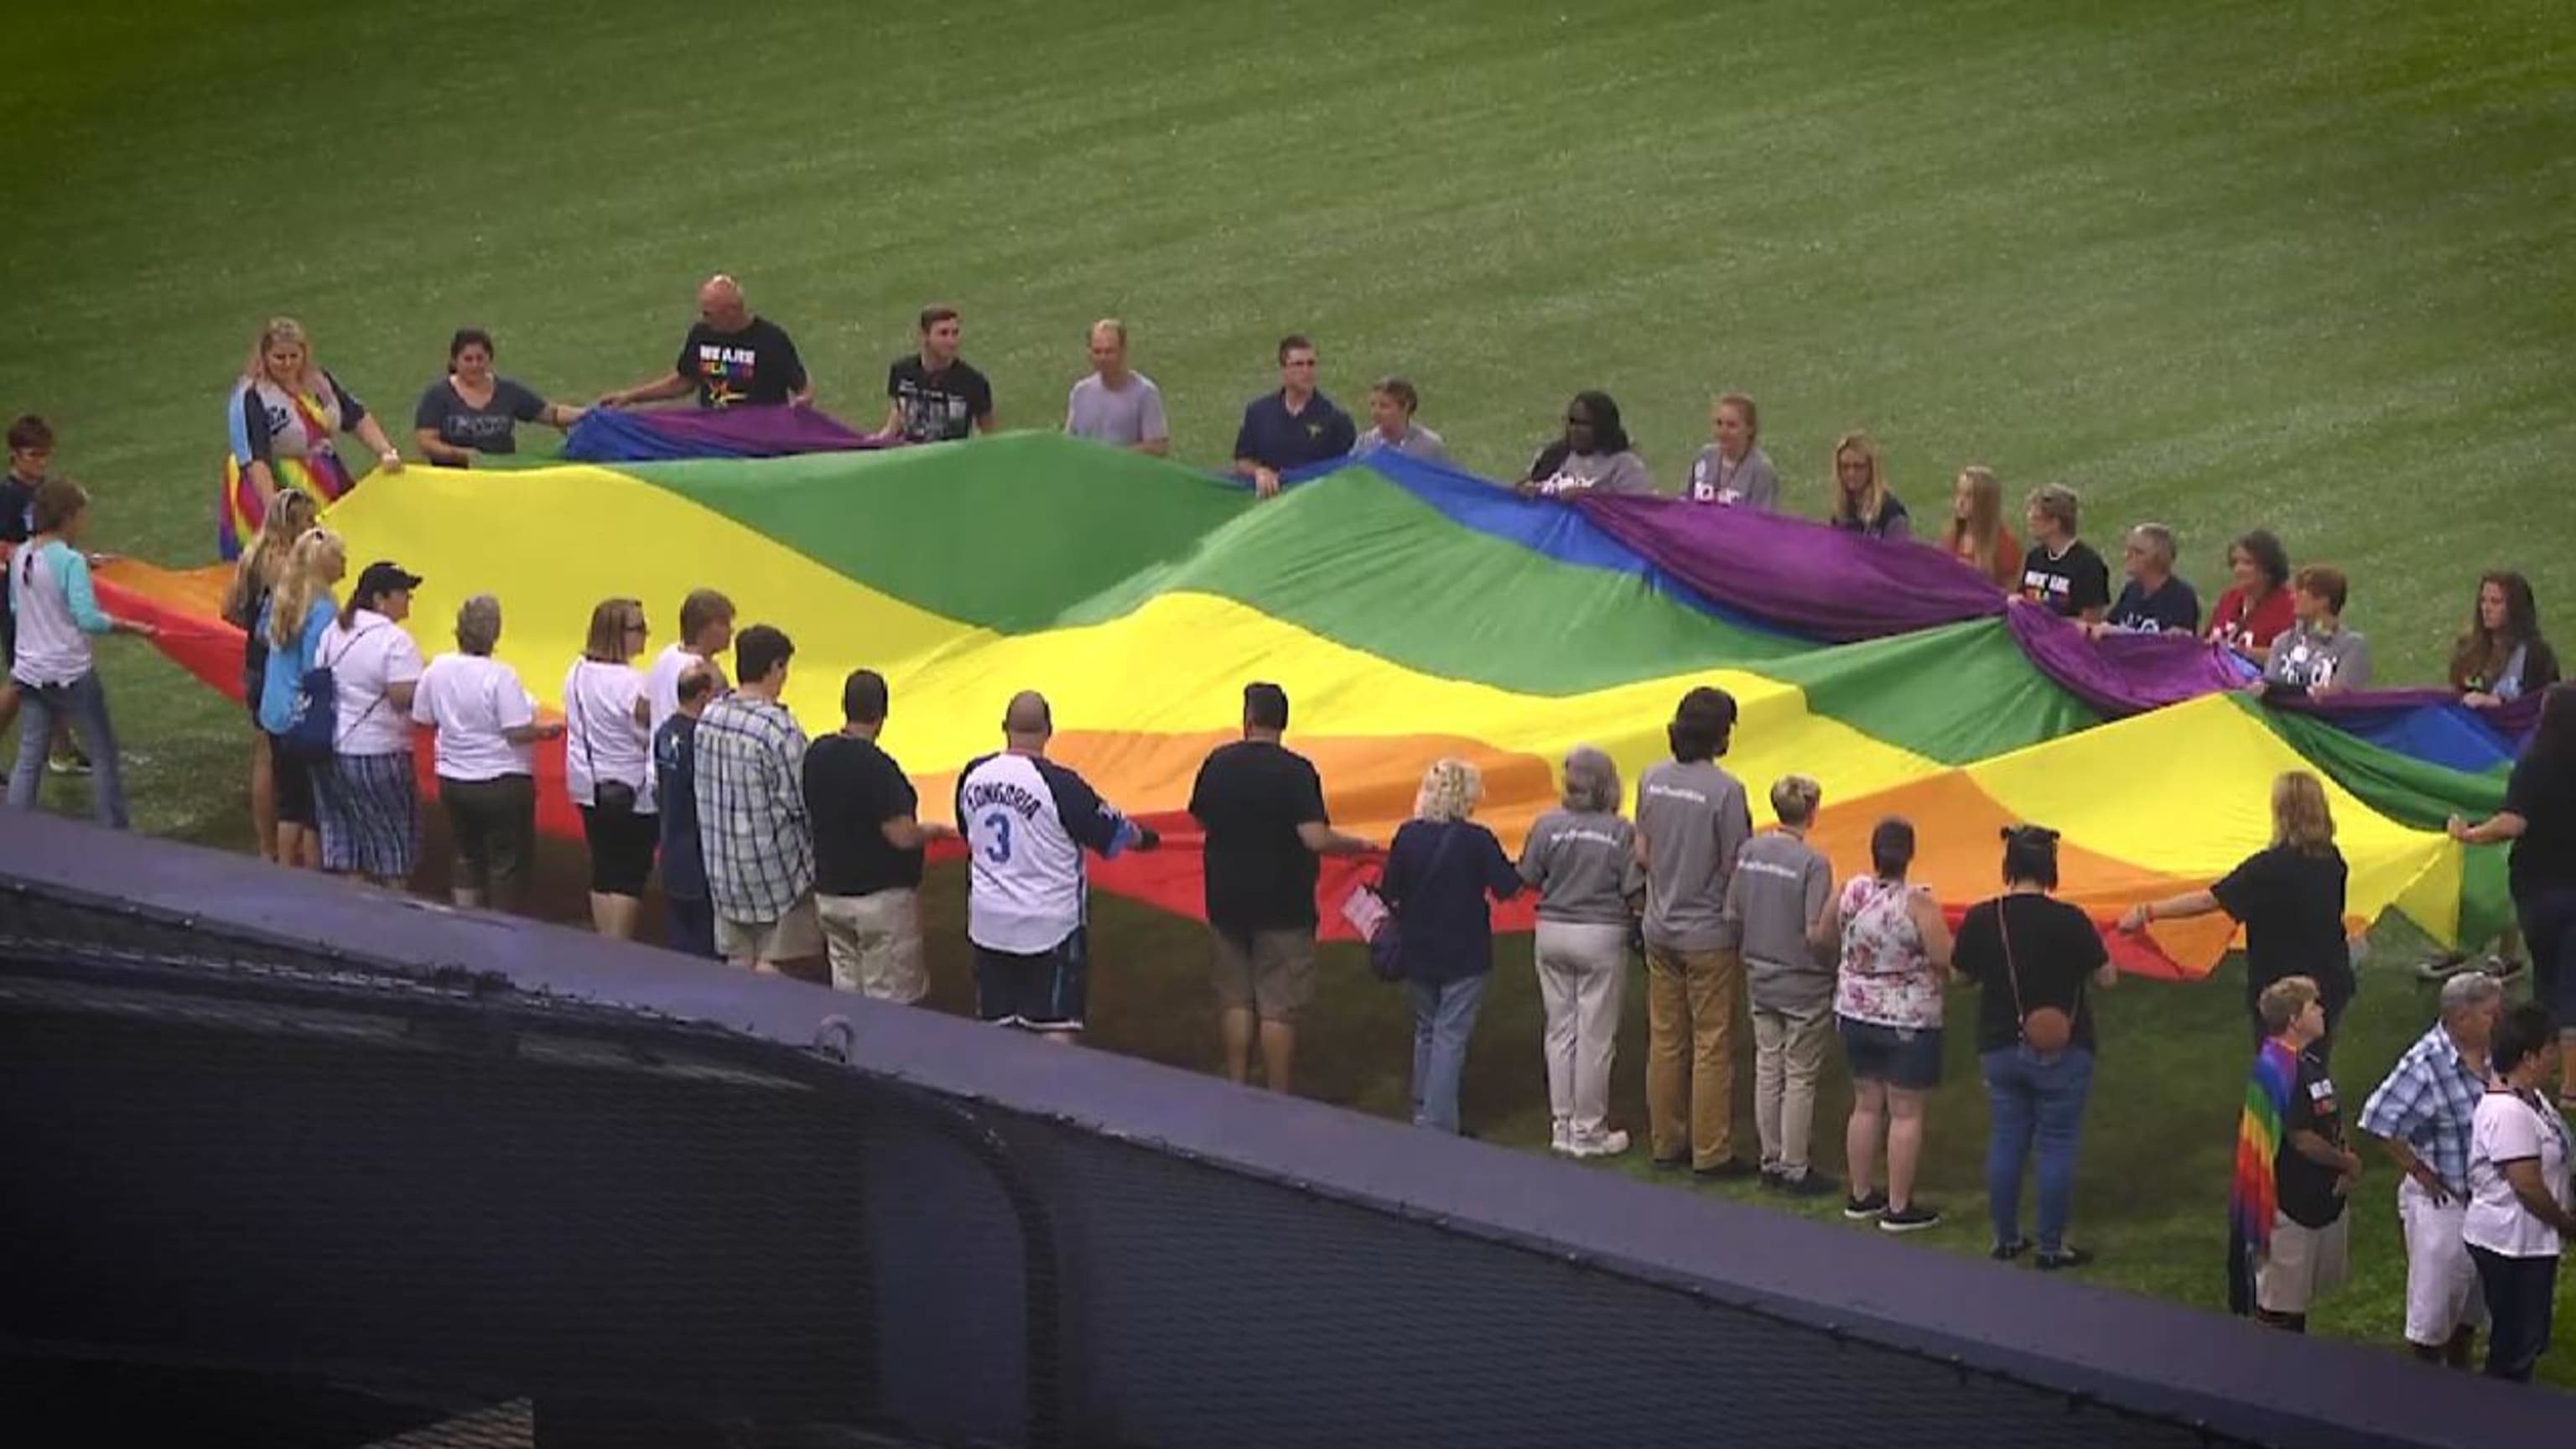 MLB honors LGBT community during Pride month